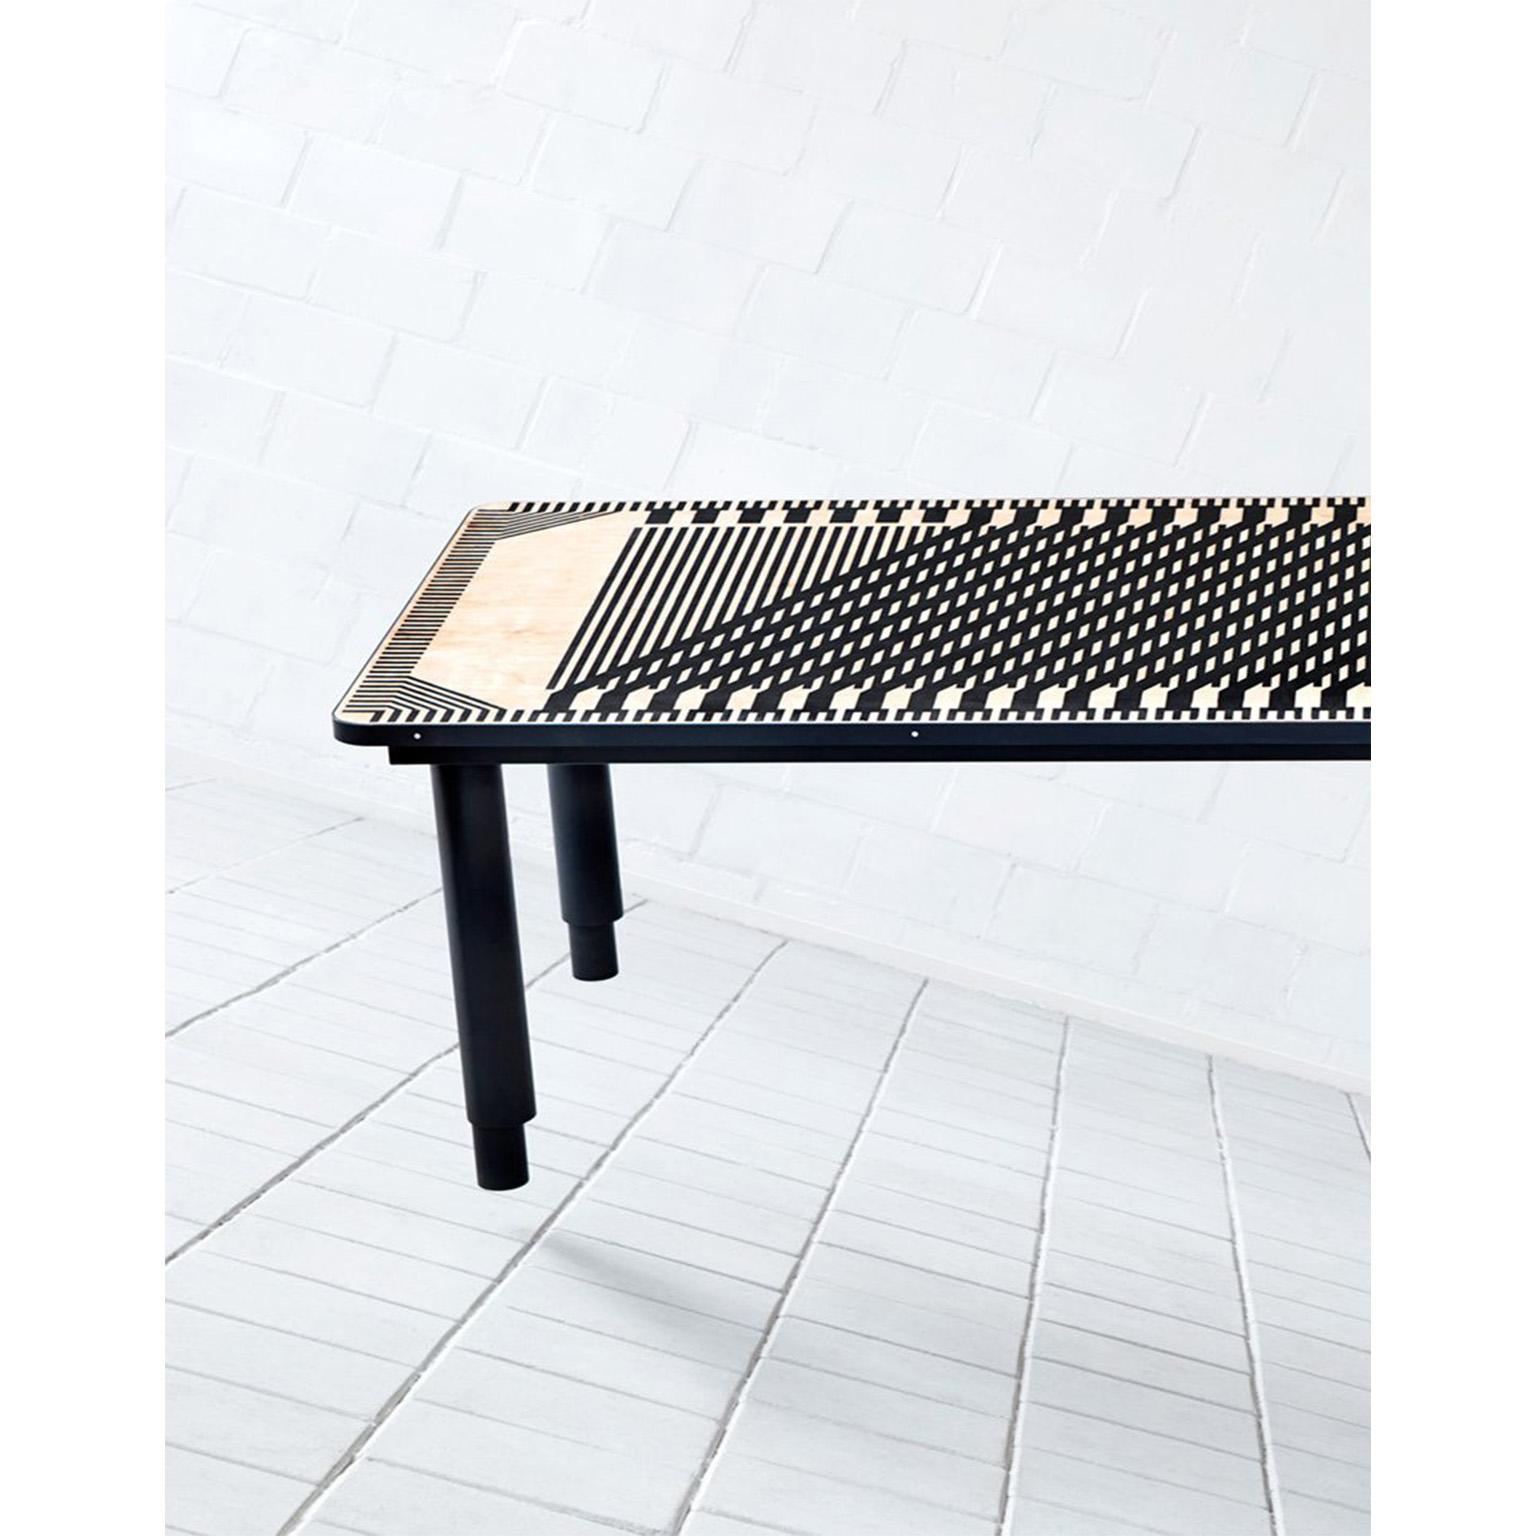 The intricate pattern and design of ‘Passage Table’ consists of a wooden inlayed, graphical pattern, and is finished with a smooth satin gloss. The table is supported by solid, metal legs with a-centric feet resulting in a slightly lighter base that